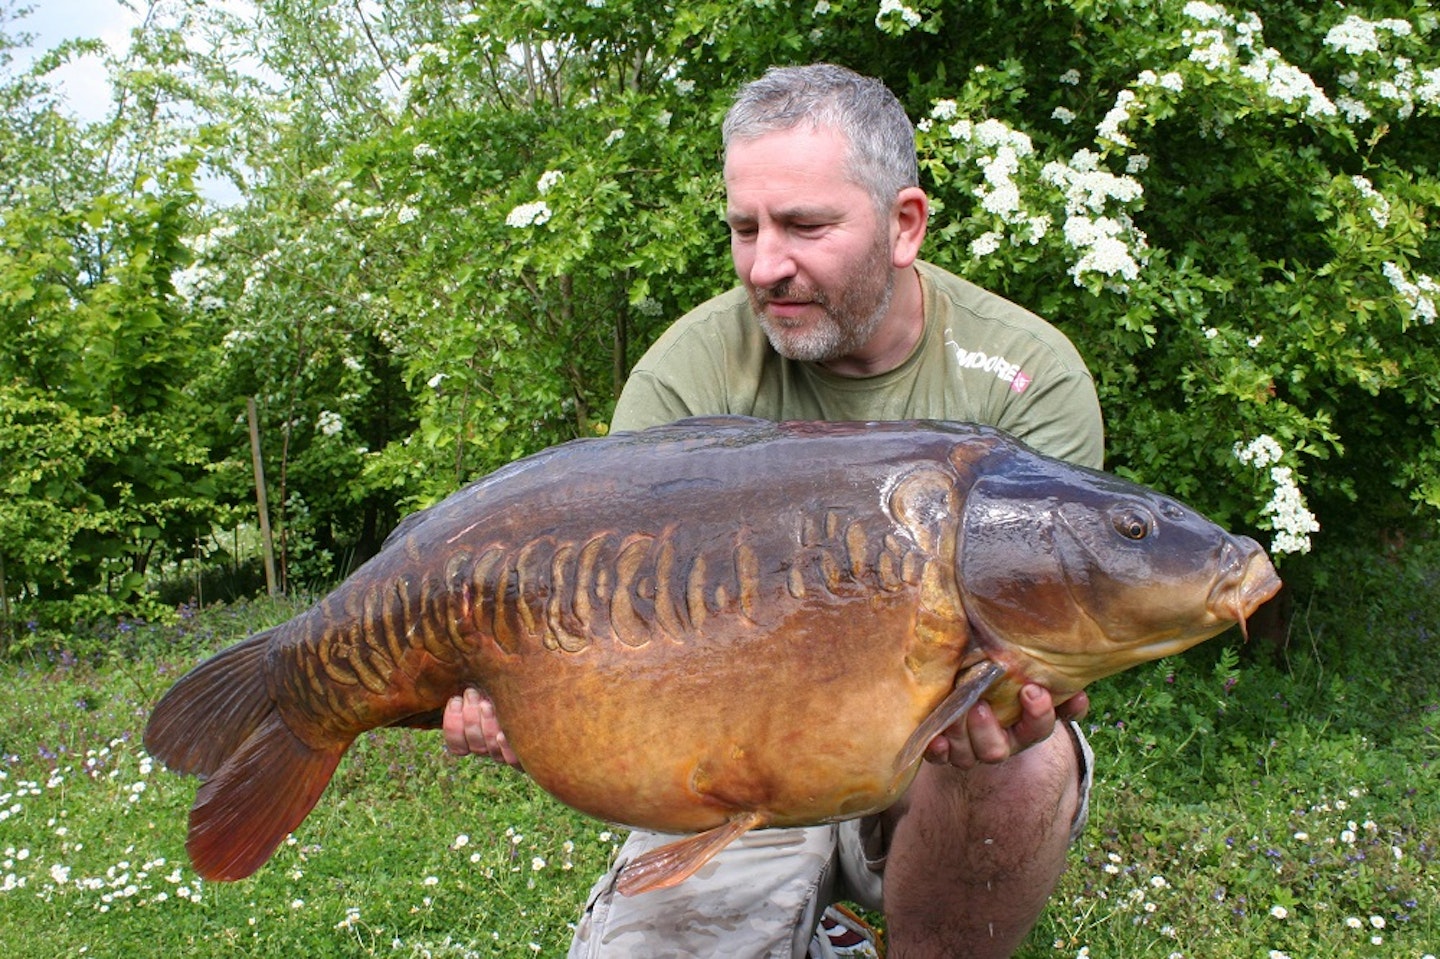 Kempy's Linear is a Manor stunner